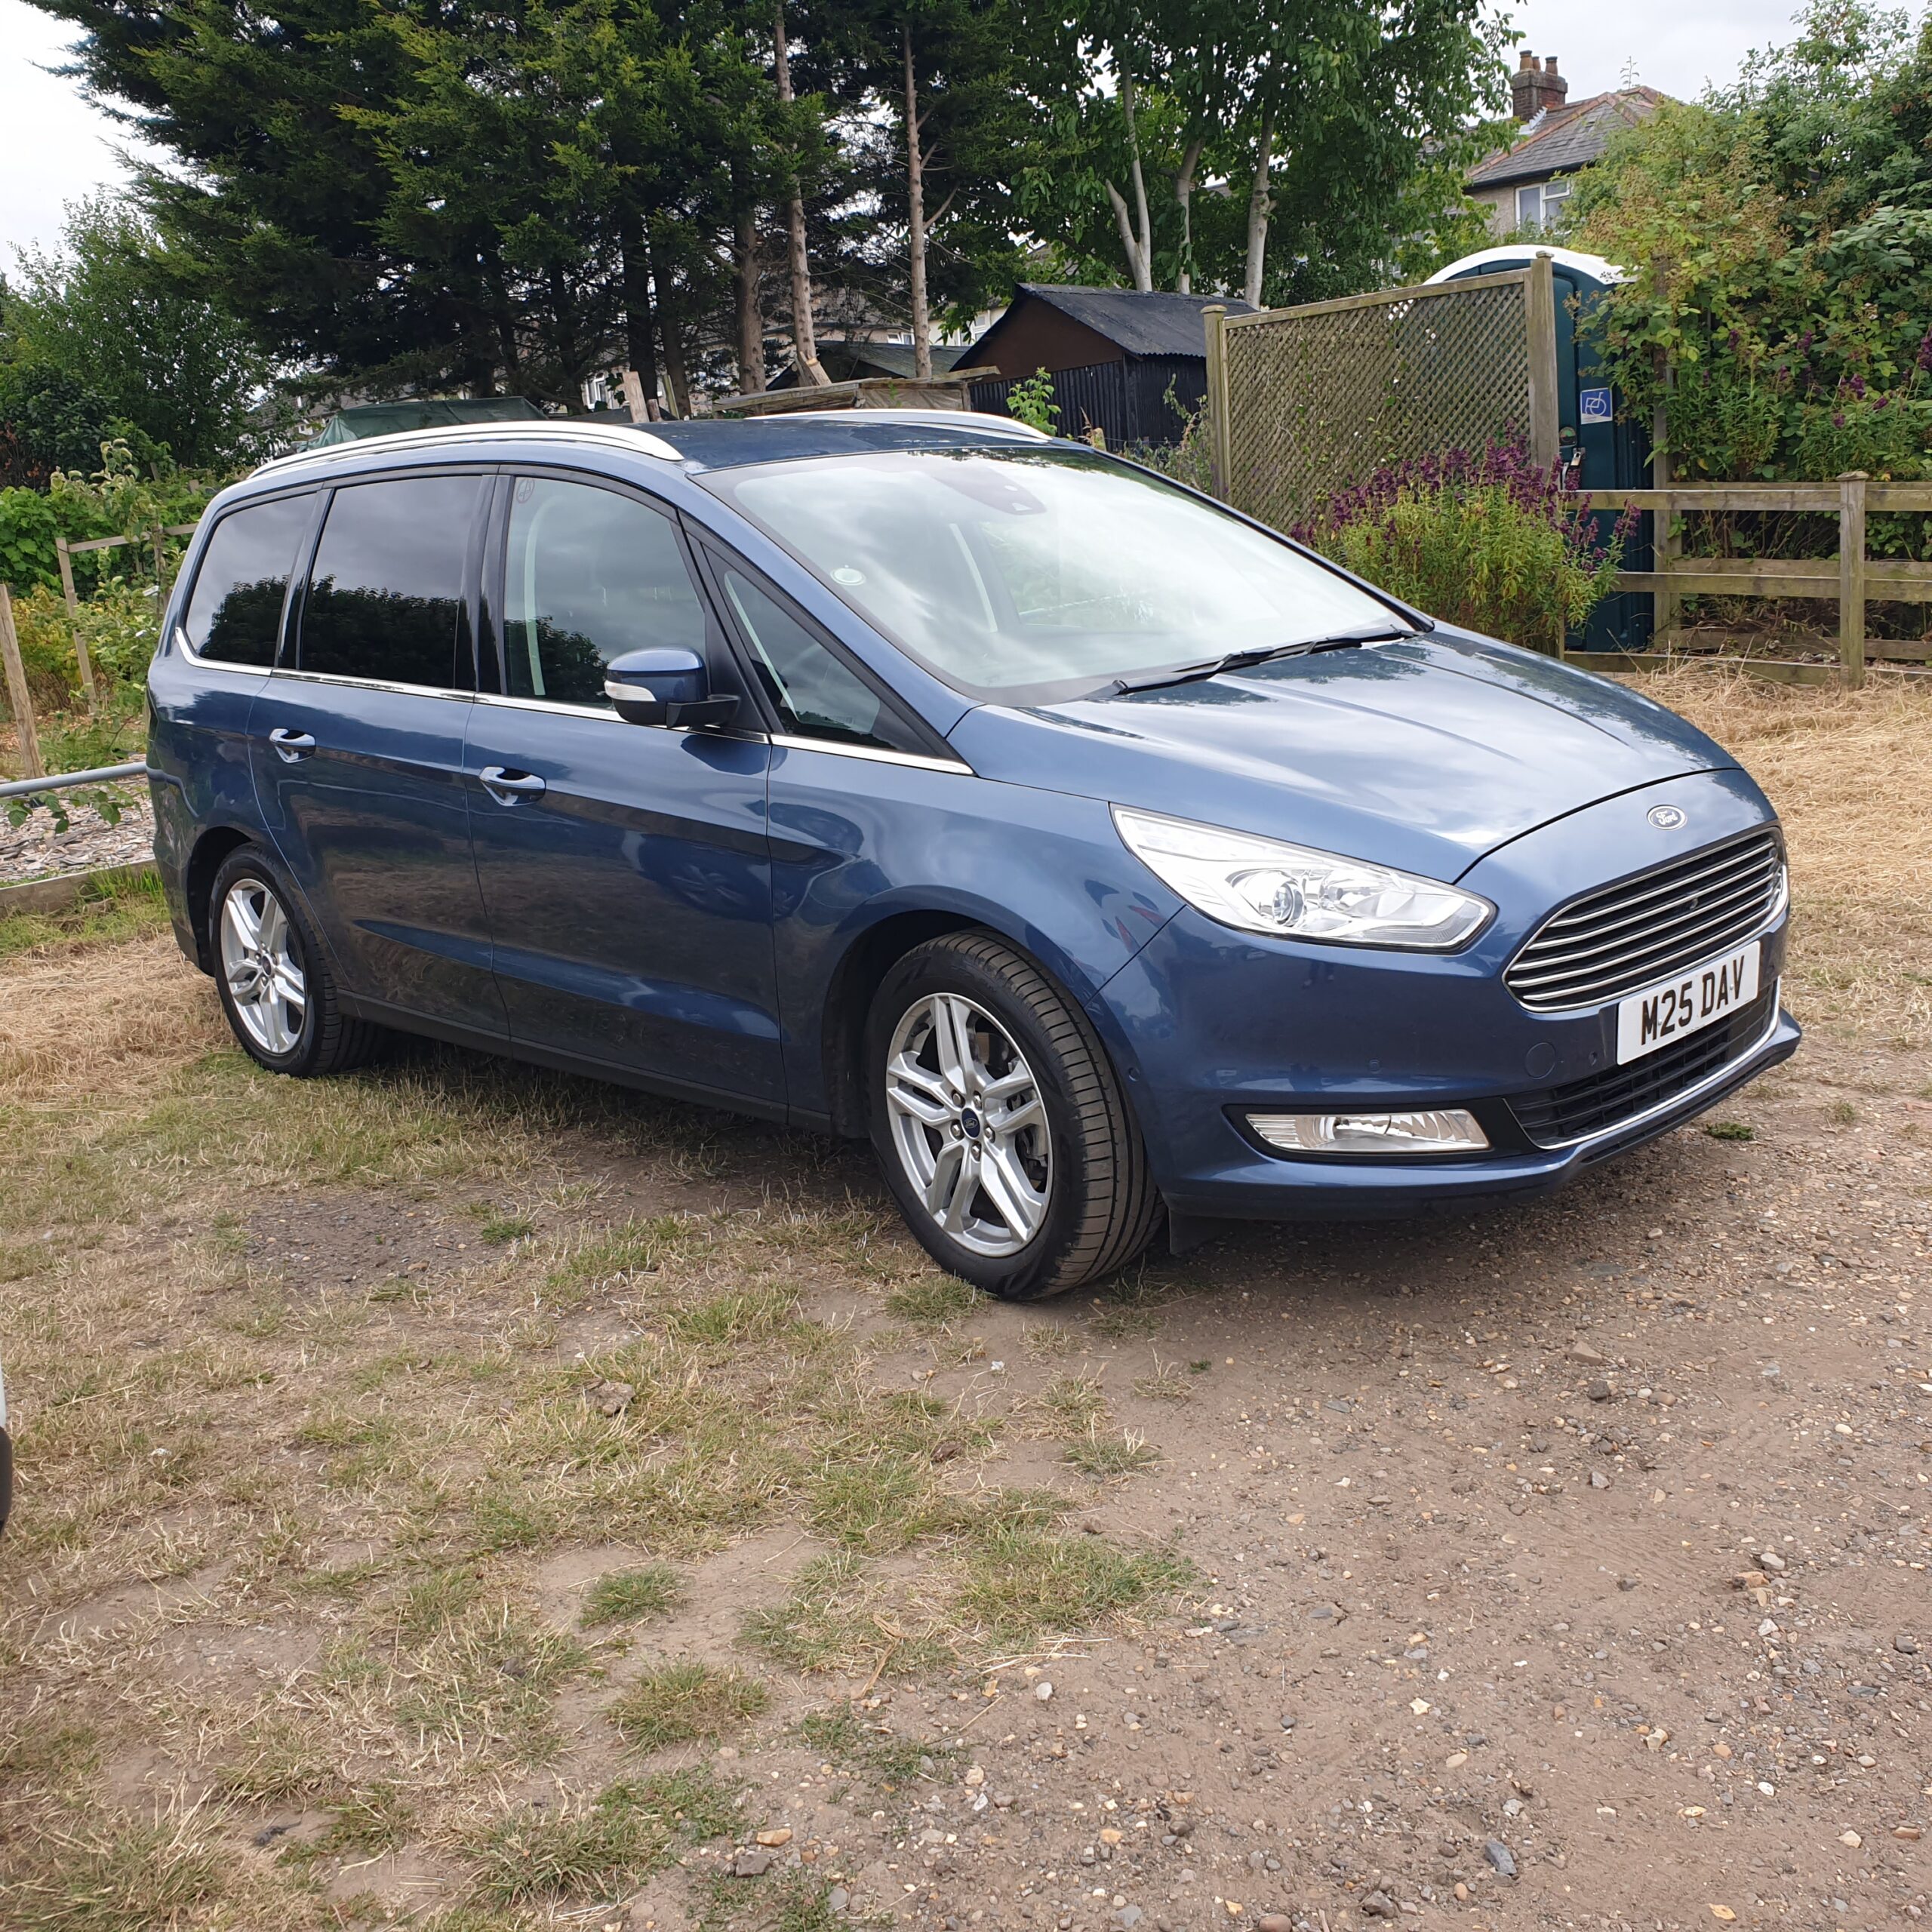 Image of a blue ford c-max